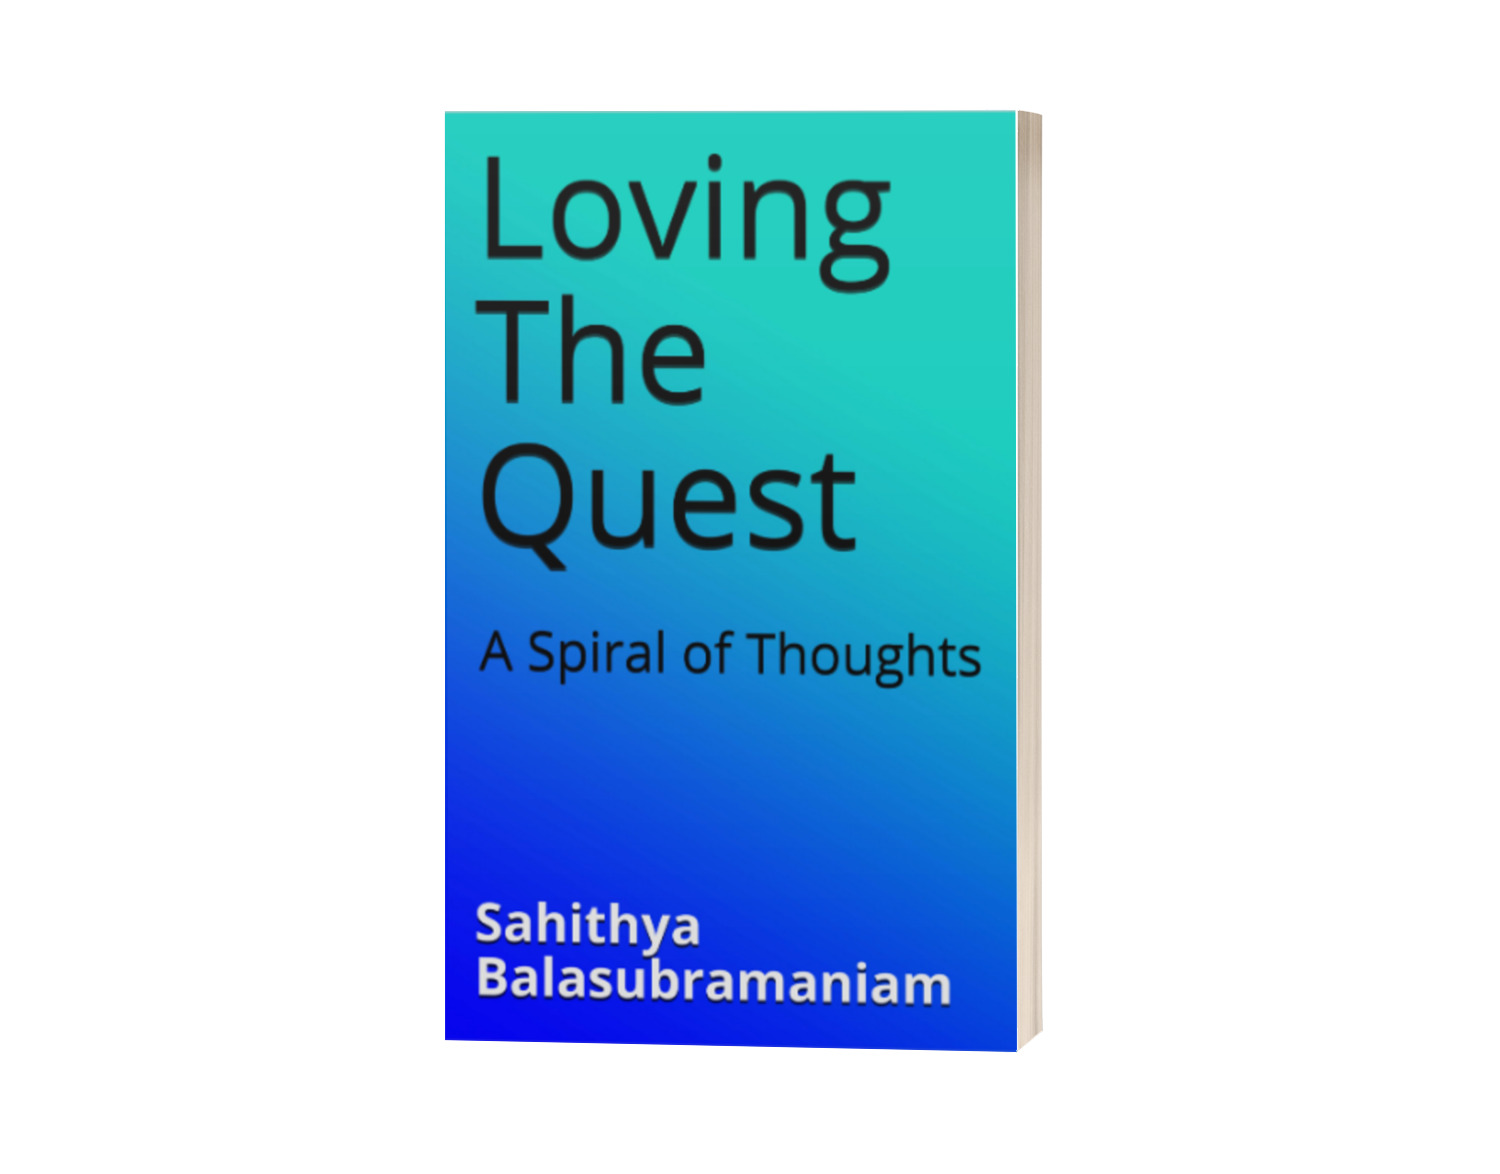 FREE: Loving The Quest : A Spiral of Thoughts by Sahithya Balasubramaniam